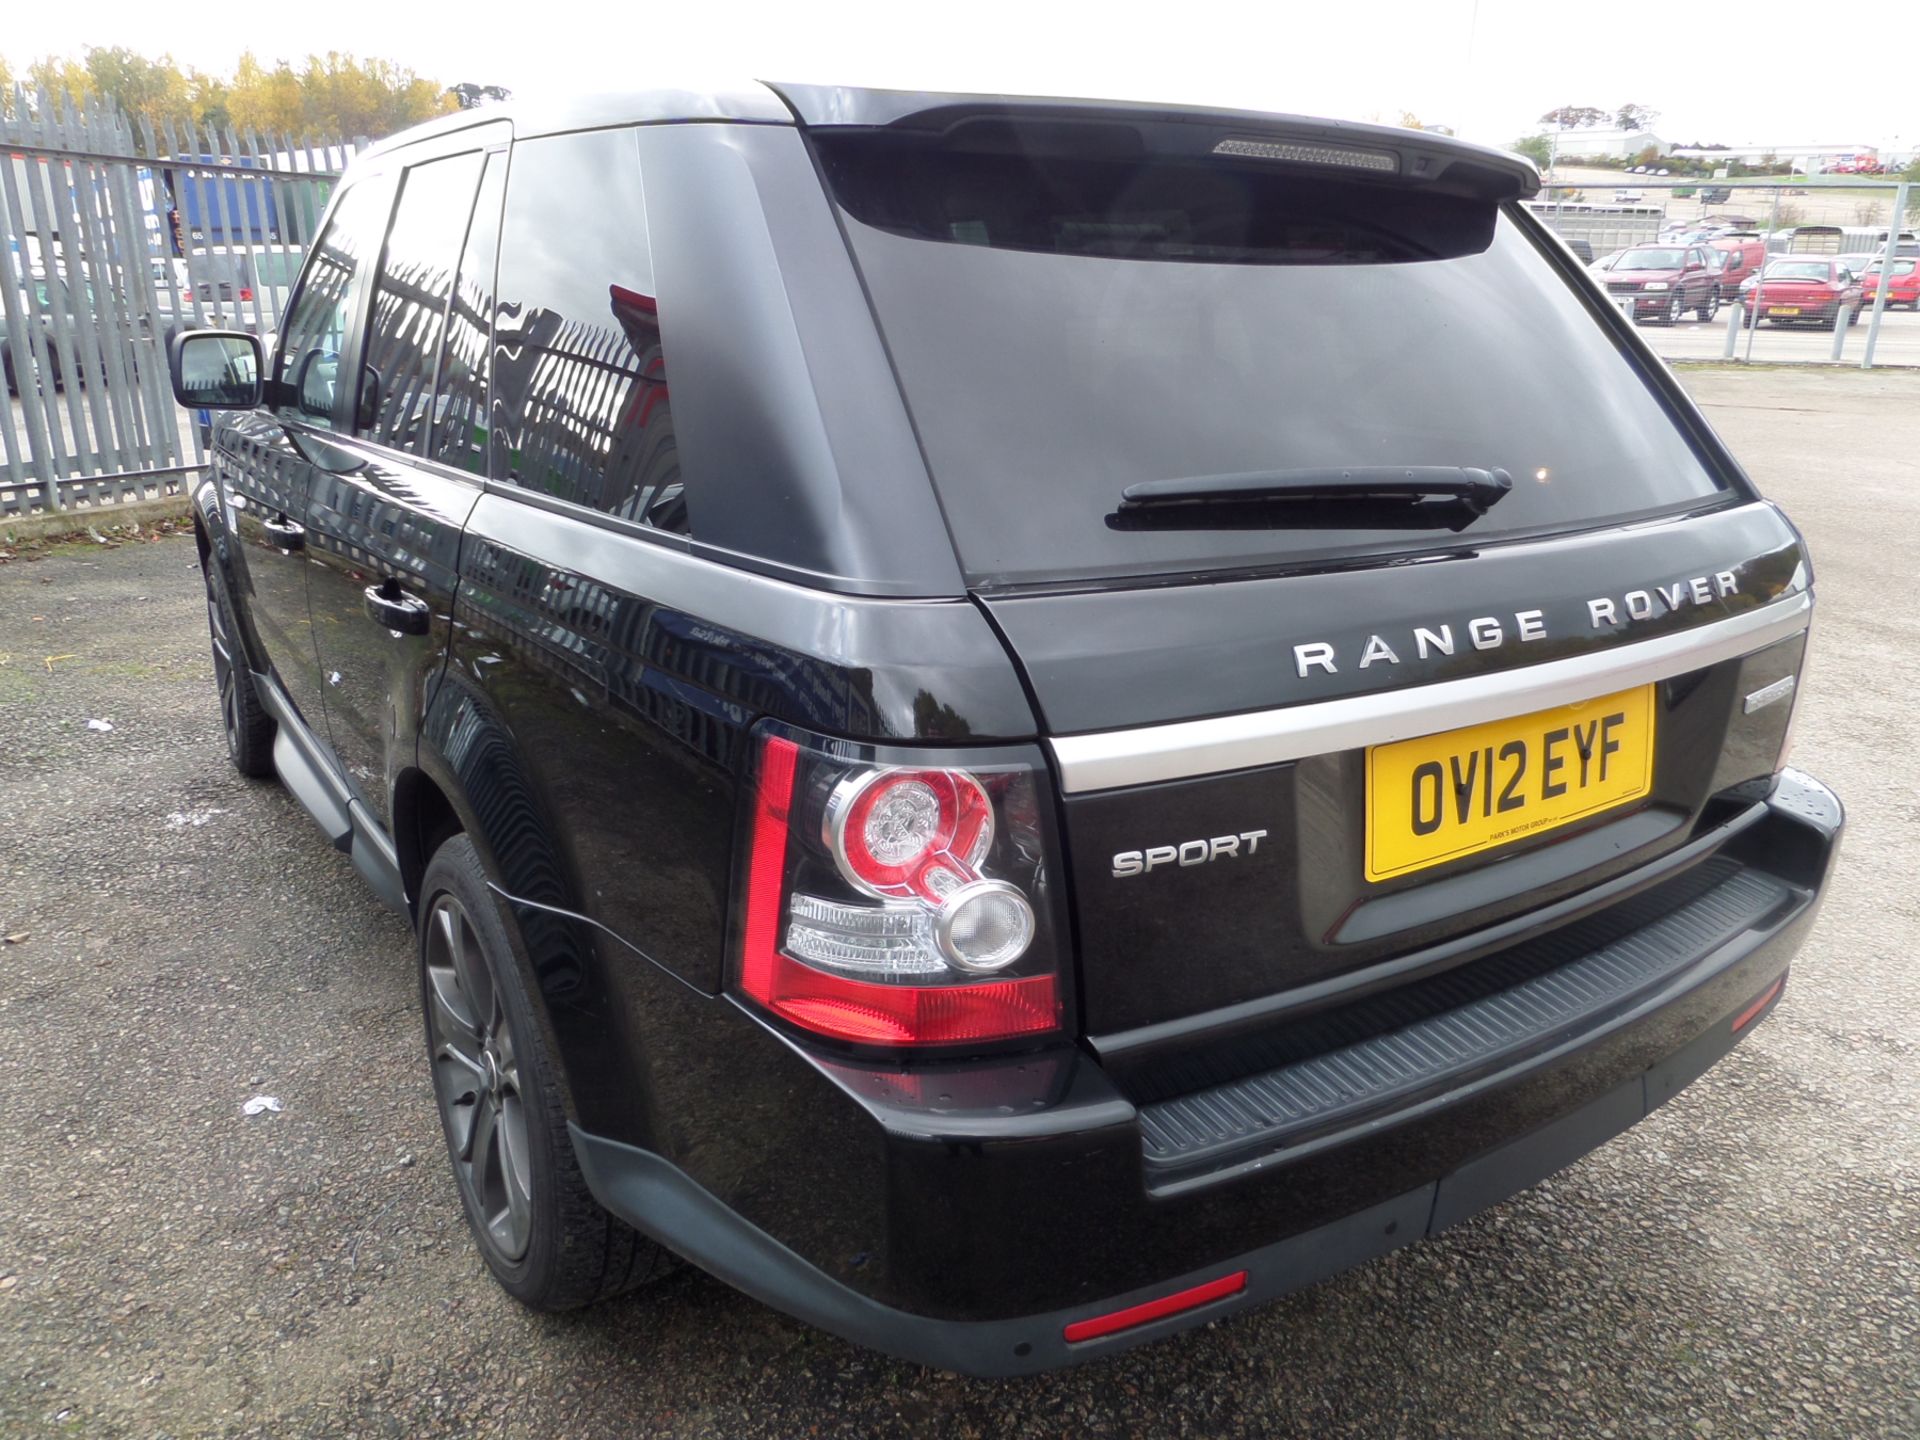 Land Rover R-rover Sport Hse Luxury - 2993cc Estate - Image 3 of 8